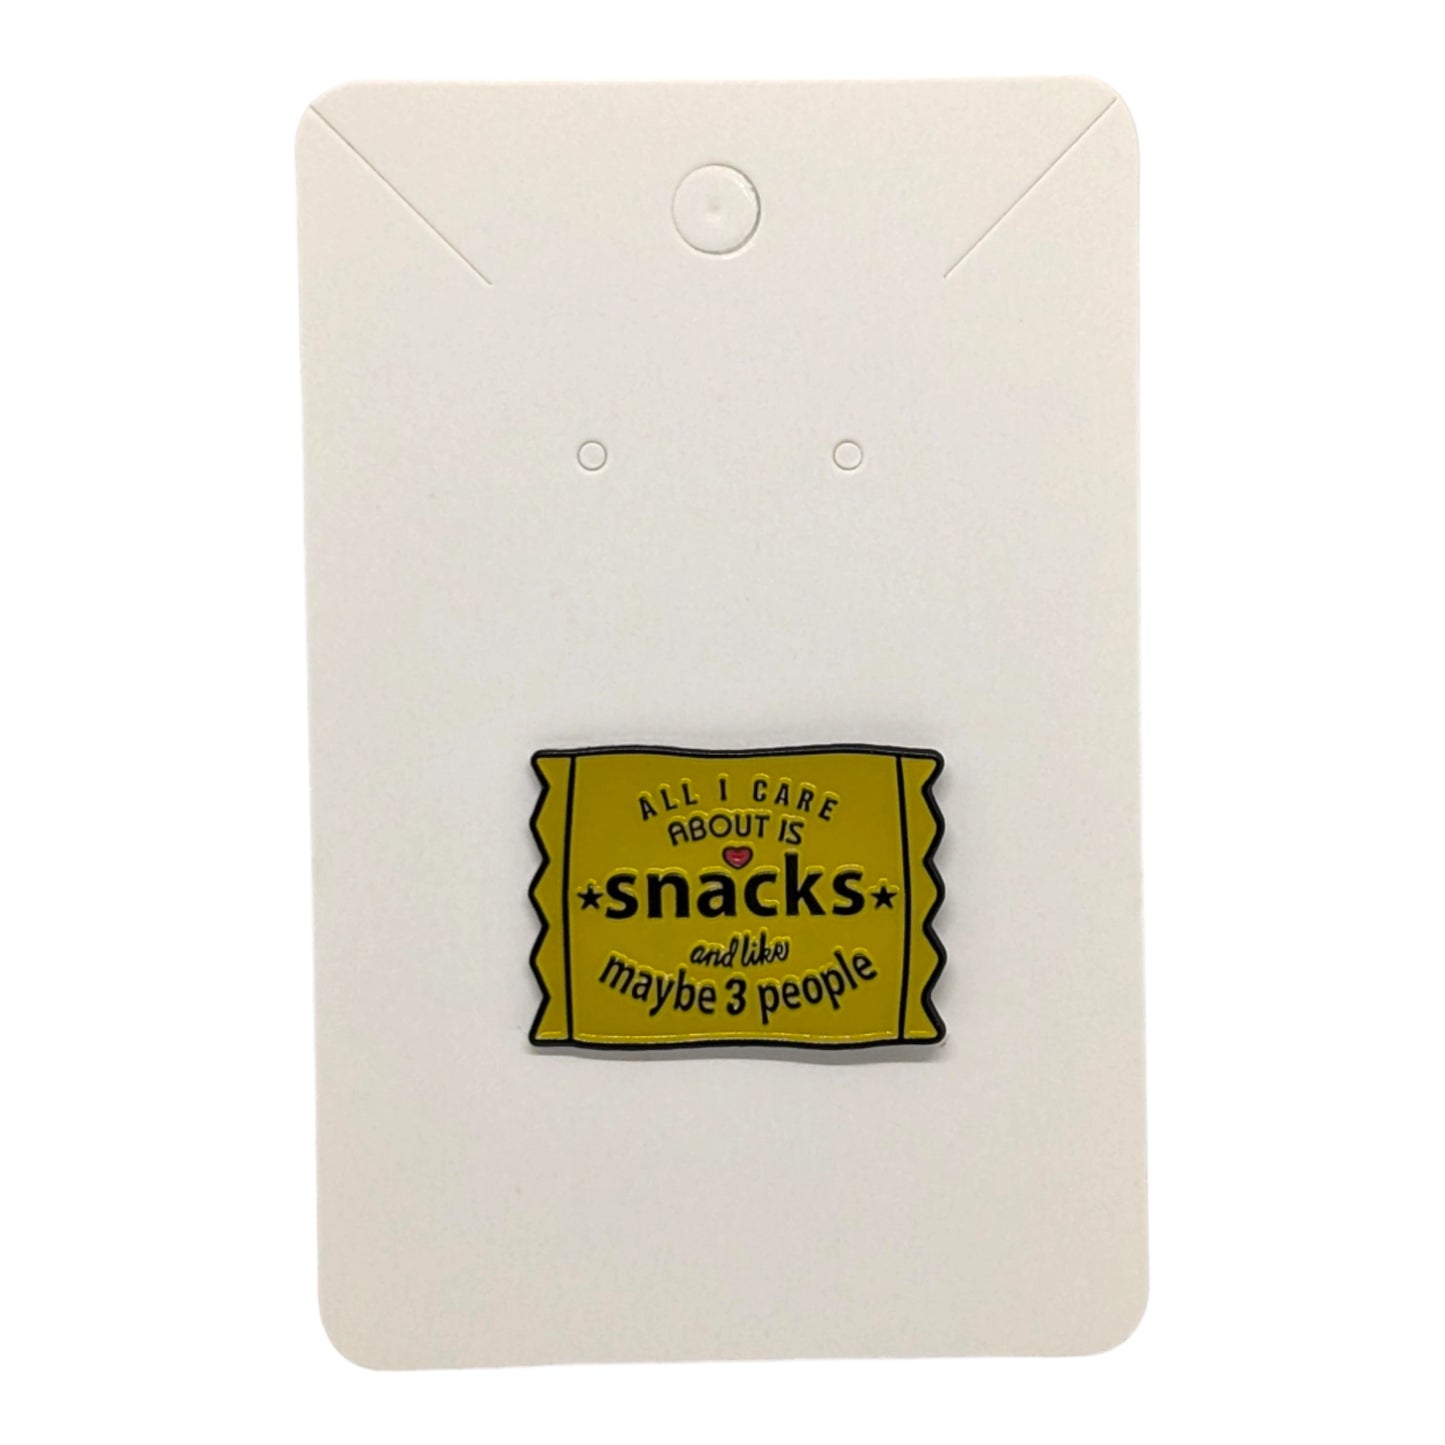 All I care about is snacks and about 3 people Enamel Pin #141